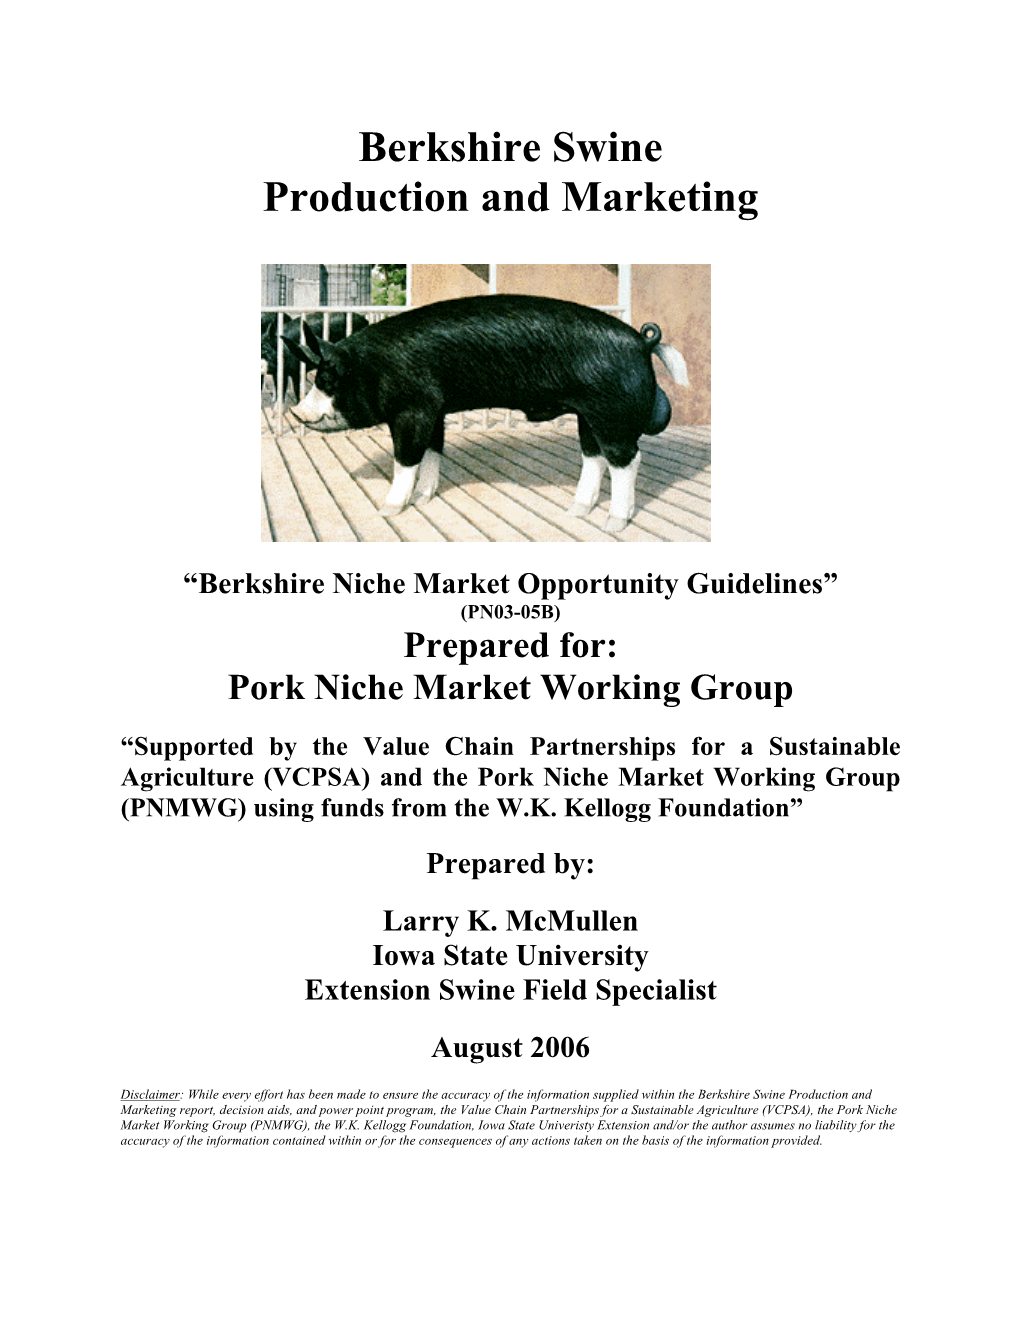 Berkshire Production and Marketing